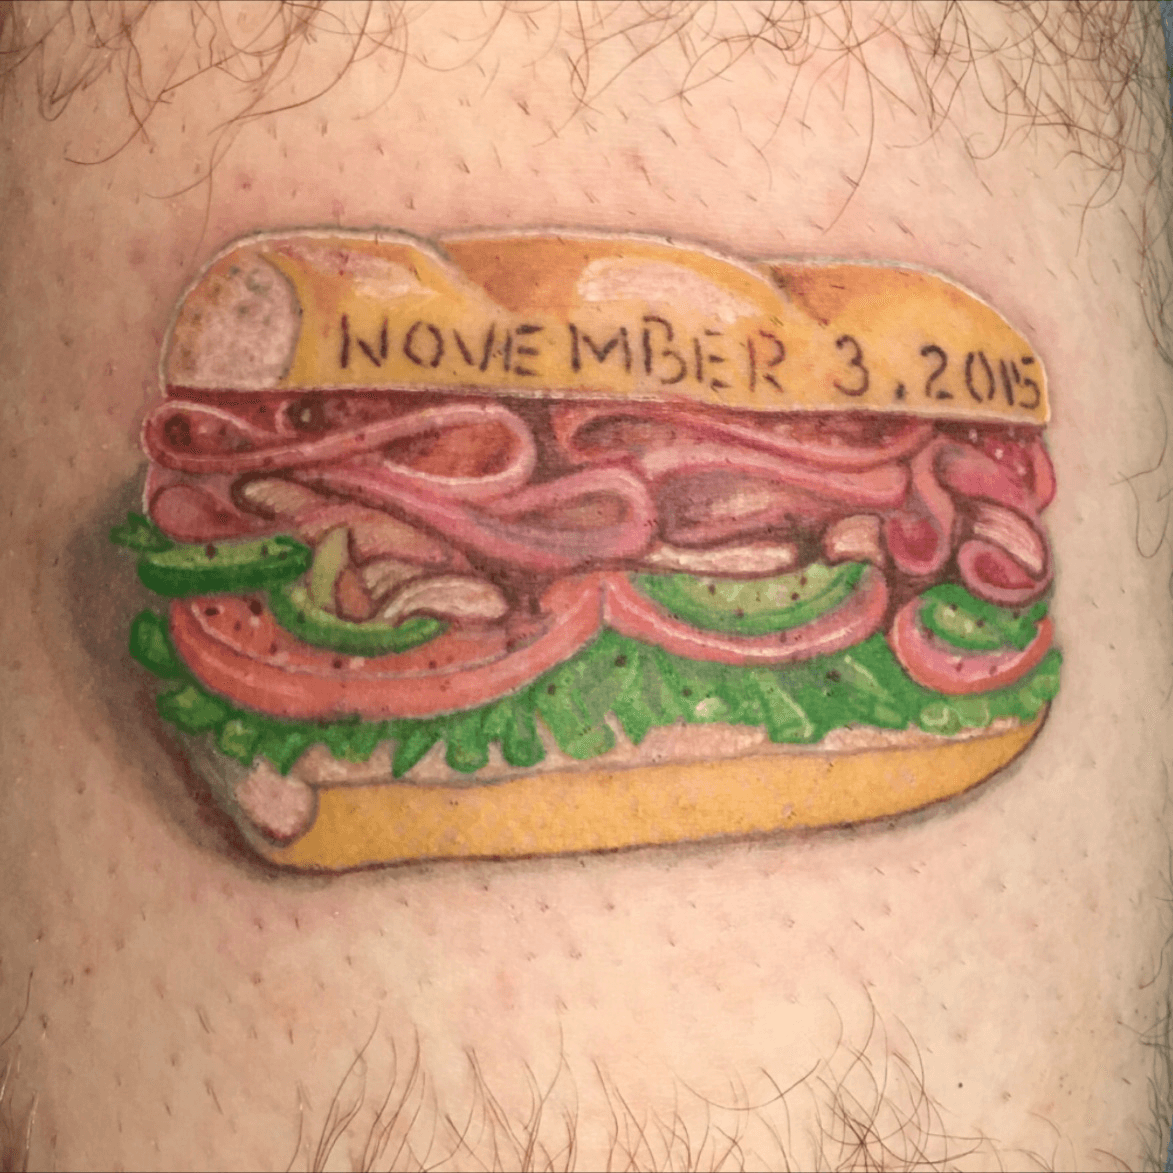 Man wins free subs for life after getting Subway tattoo